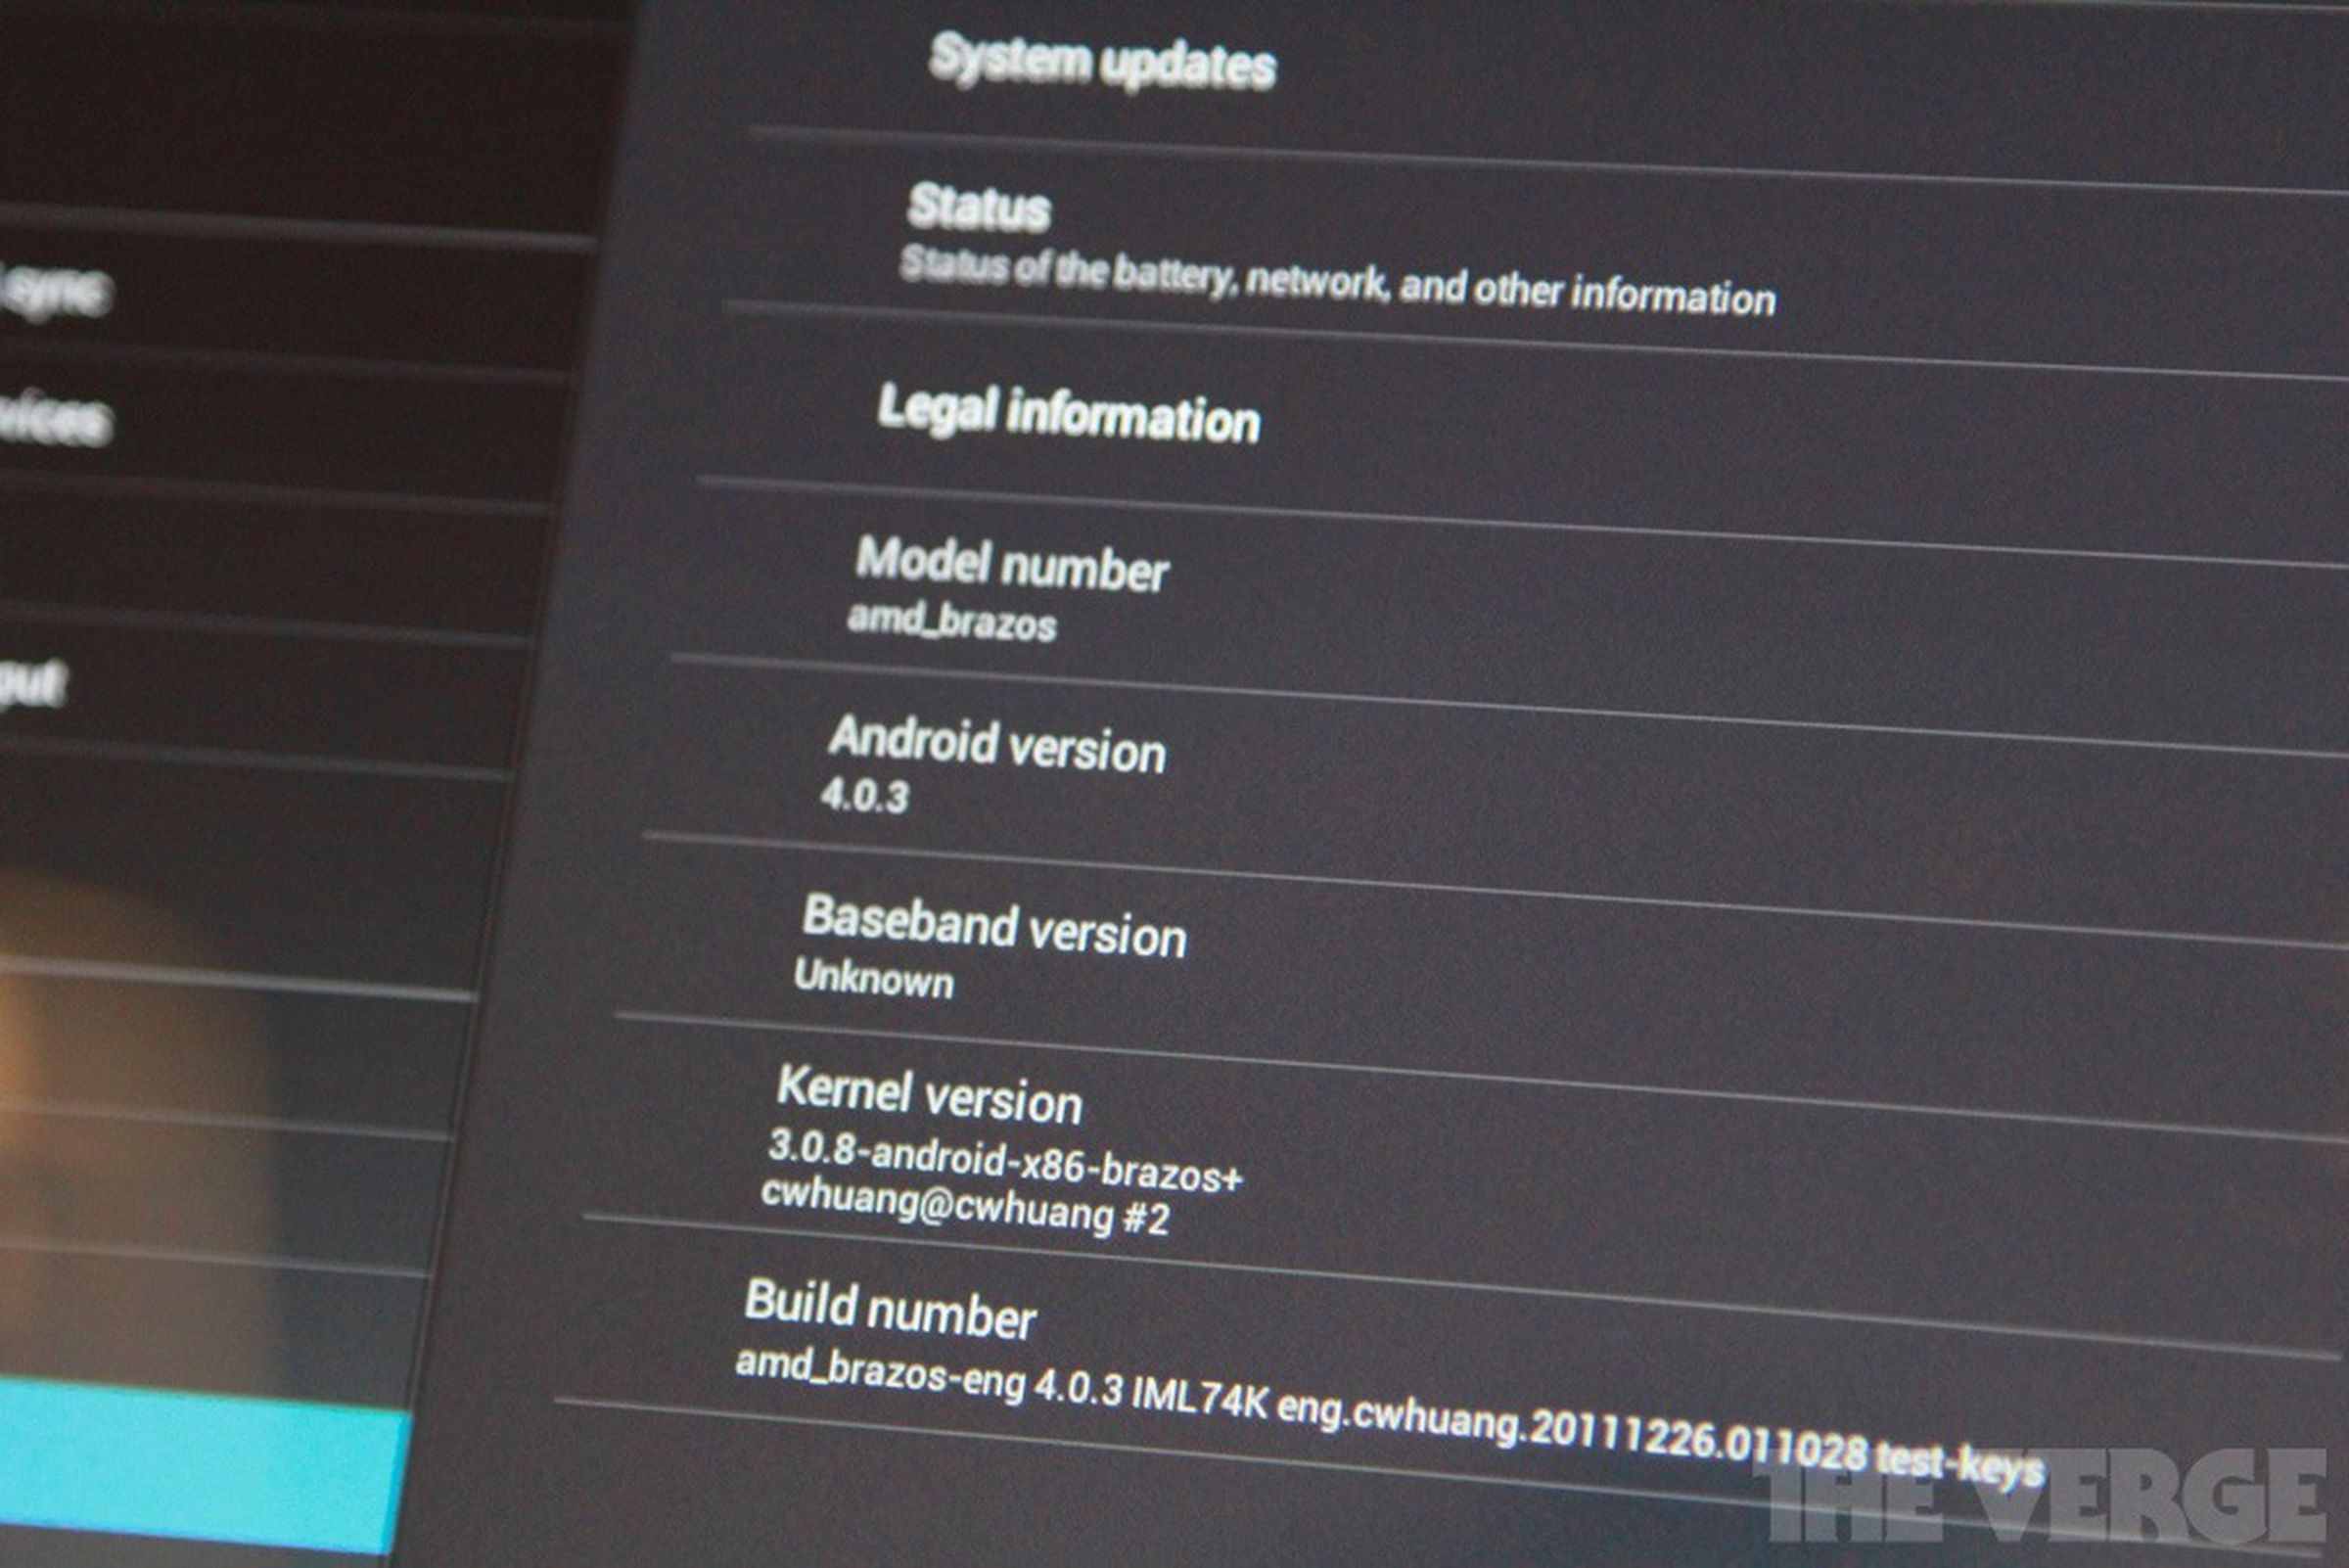 MSI WindPad 110W running Android 4.0 (hands-on pictures)